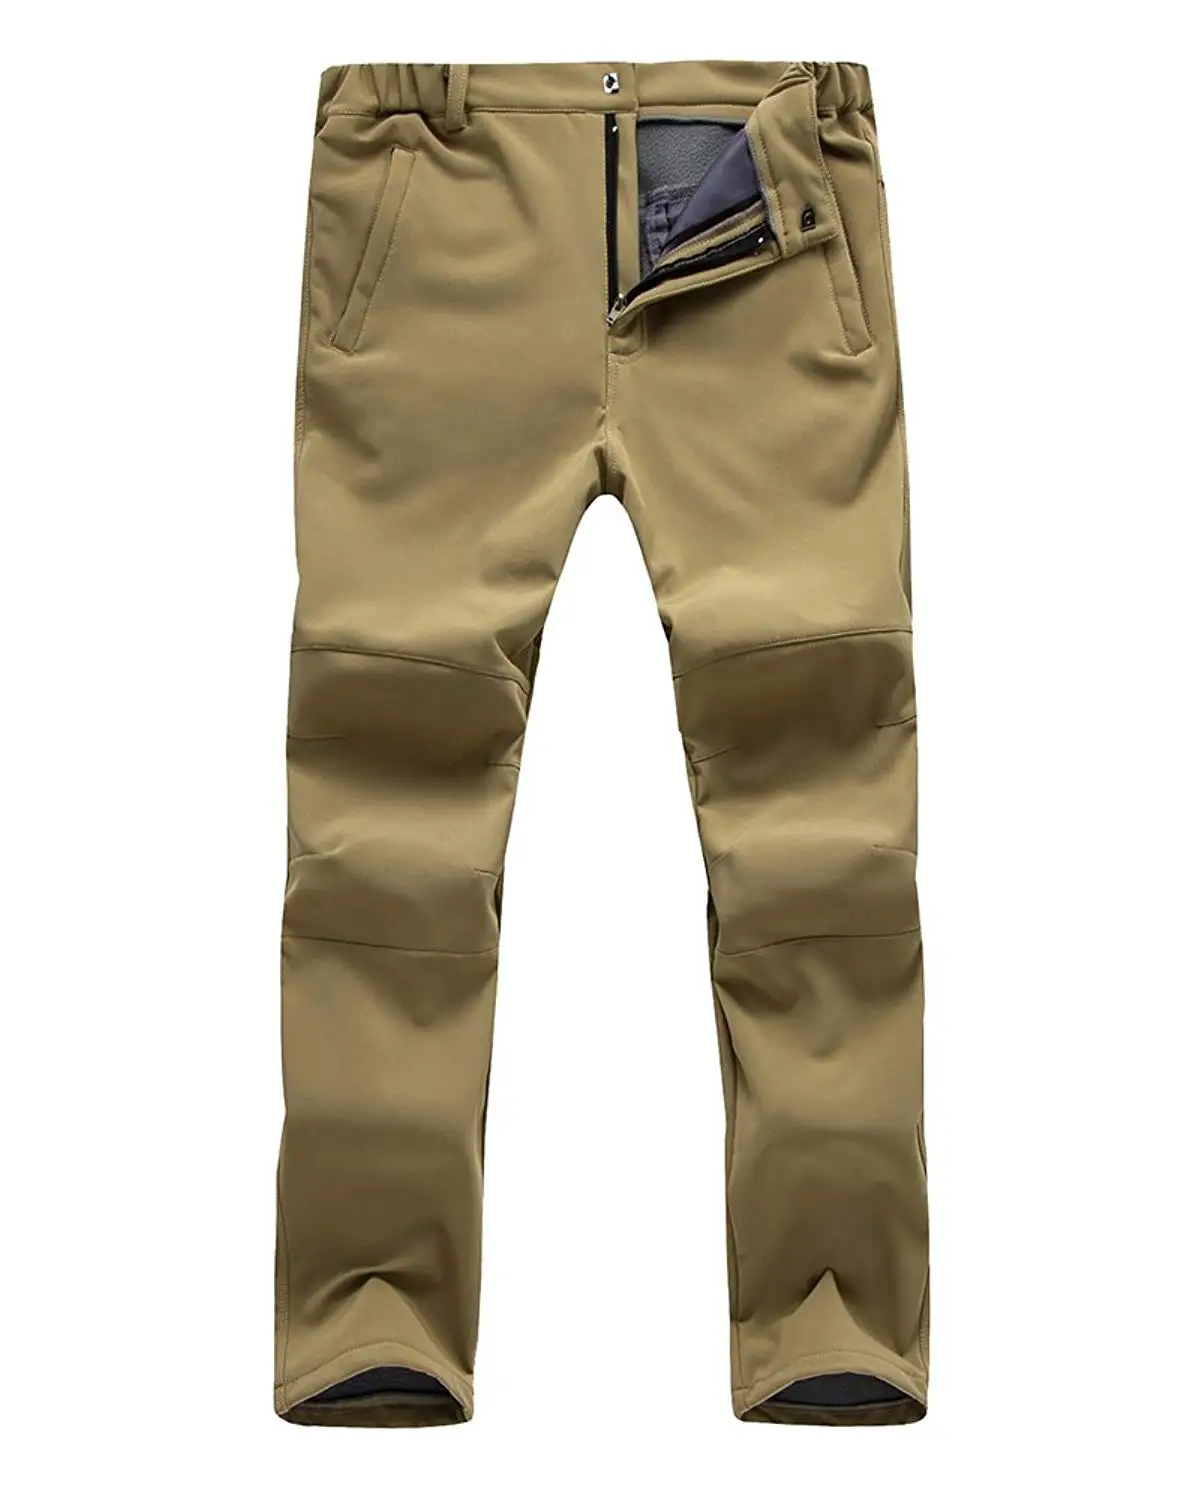 Cheap Lined Wind Pants, find Lined Wind Pants deals on line at Alibaba.com